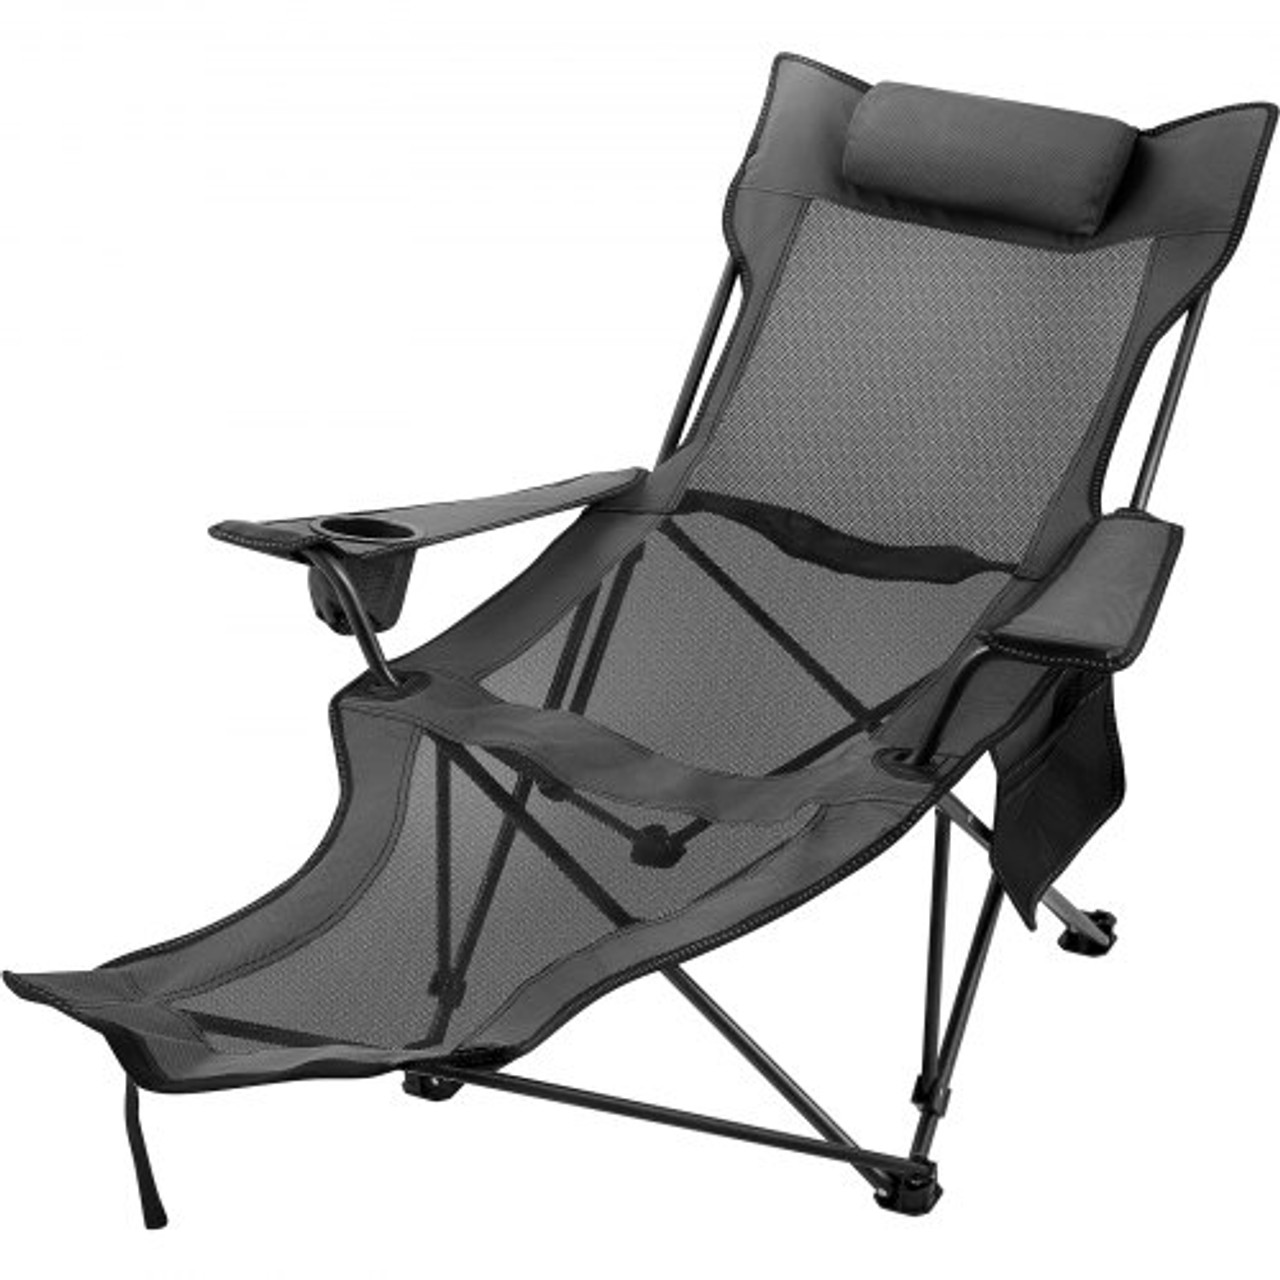 Lawn Chair USA Black Cup Holder